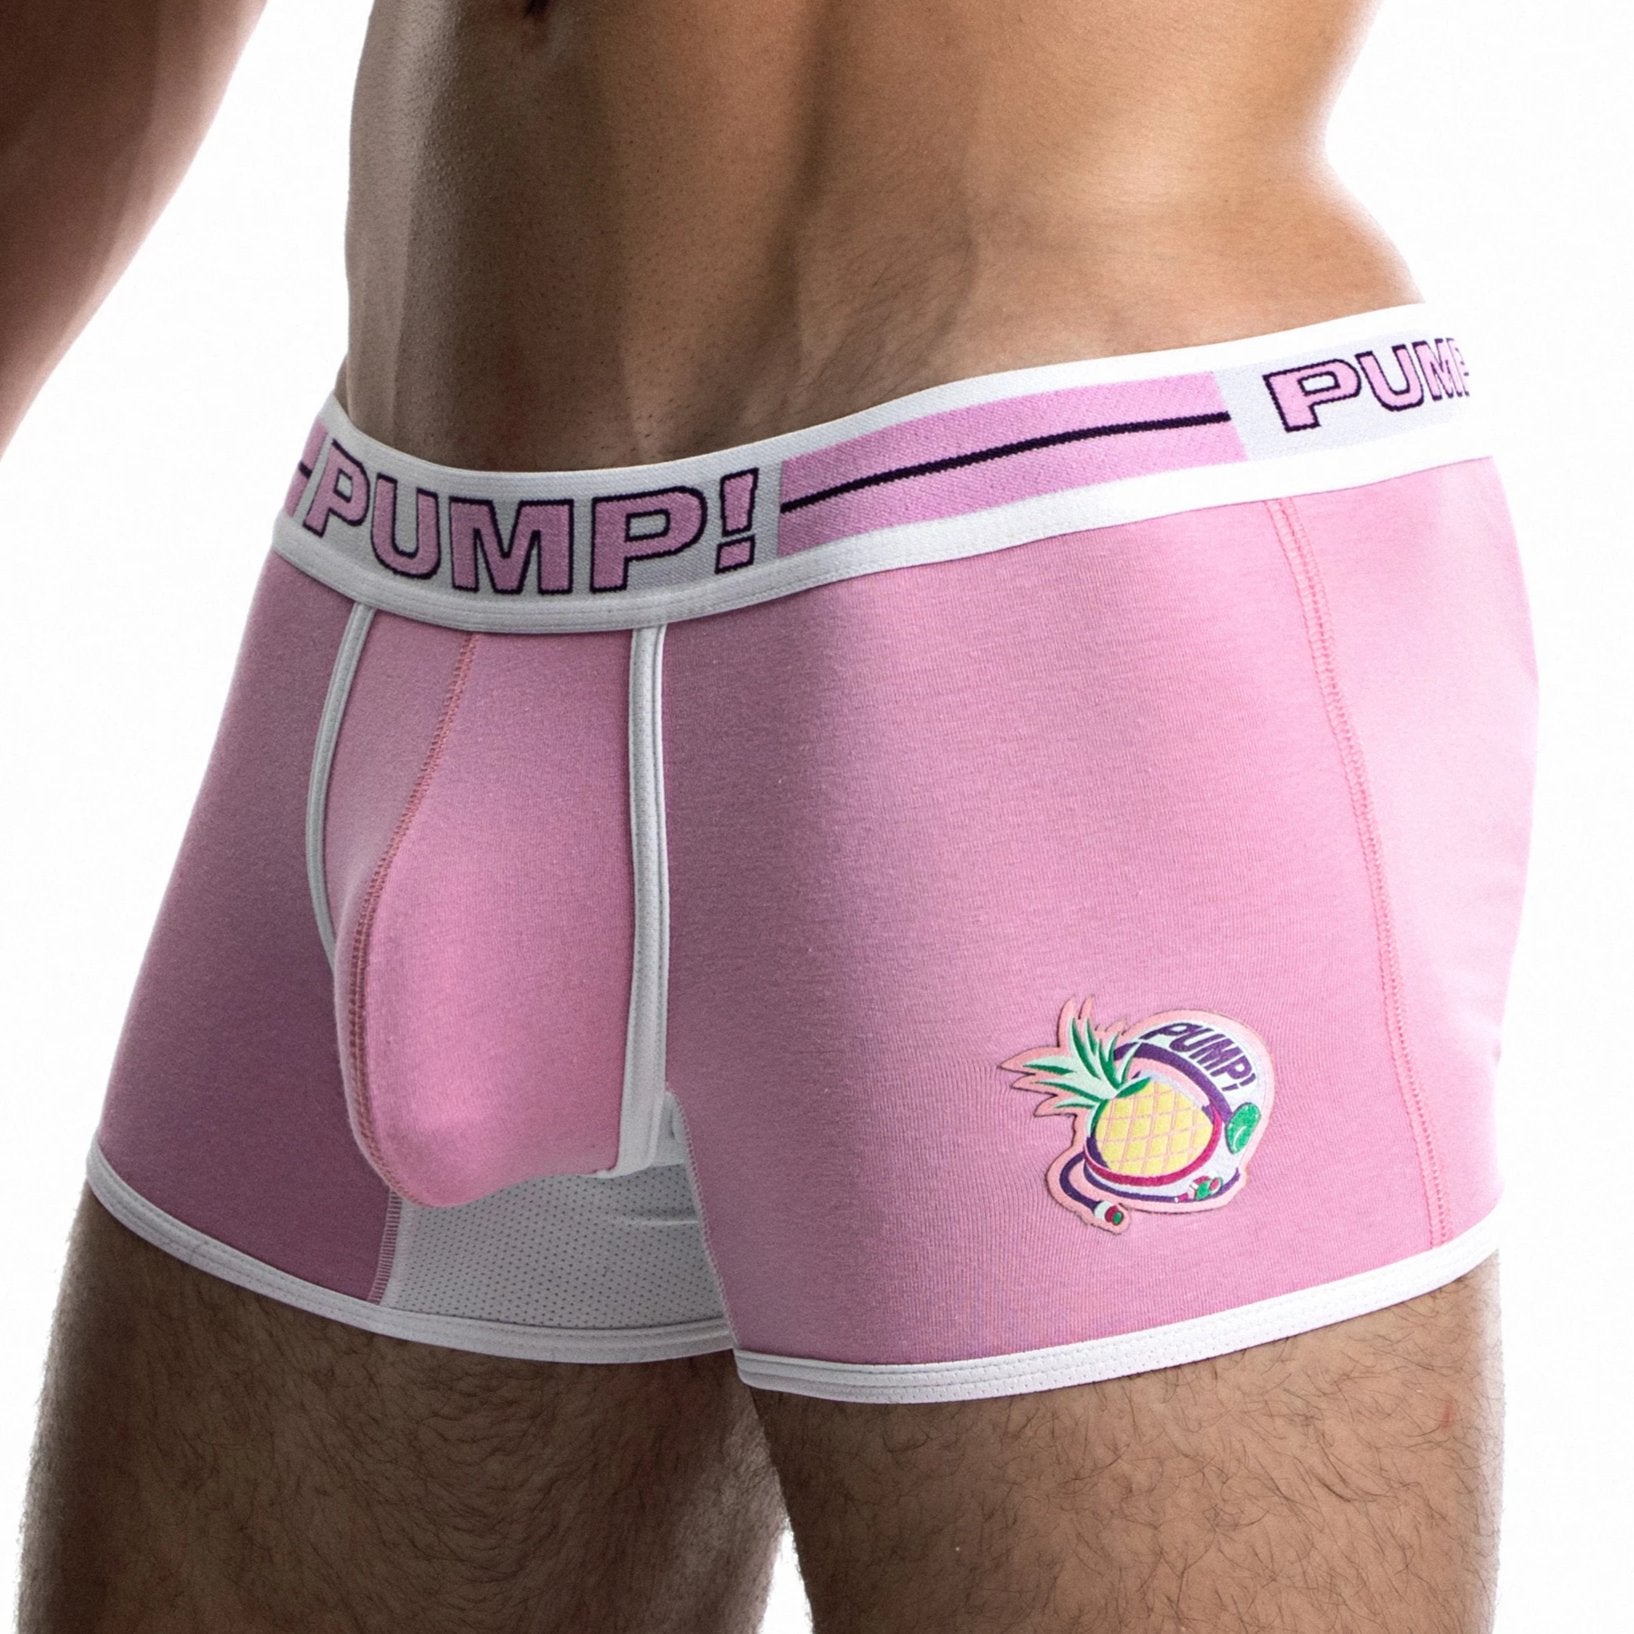 Space Candy Boxer - Pink Side by PUMP! Underwear at Trenderwear.com